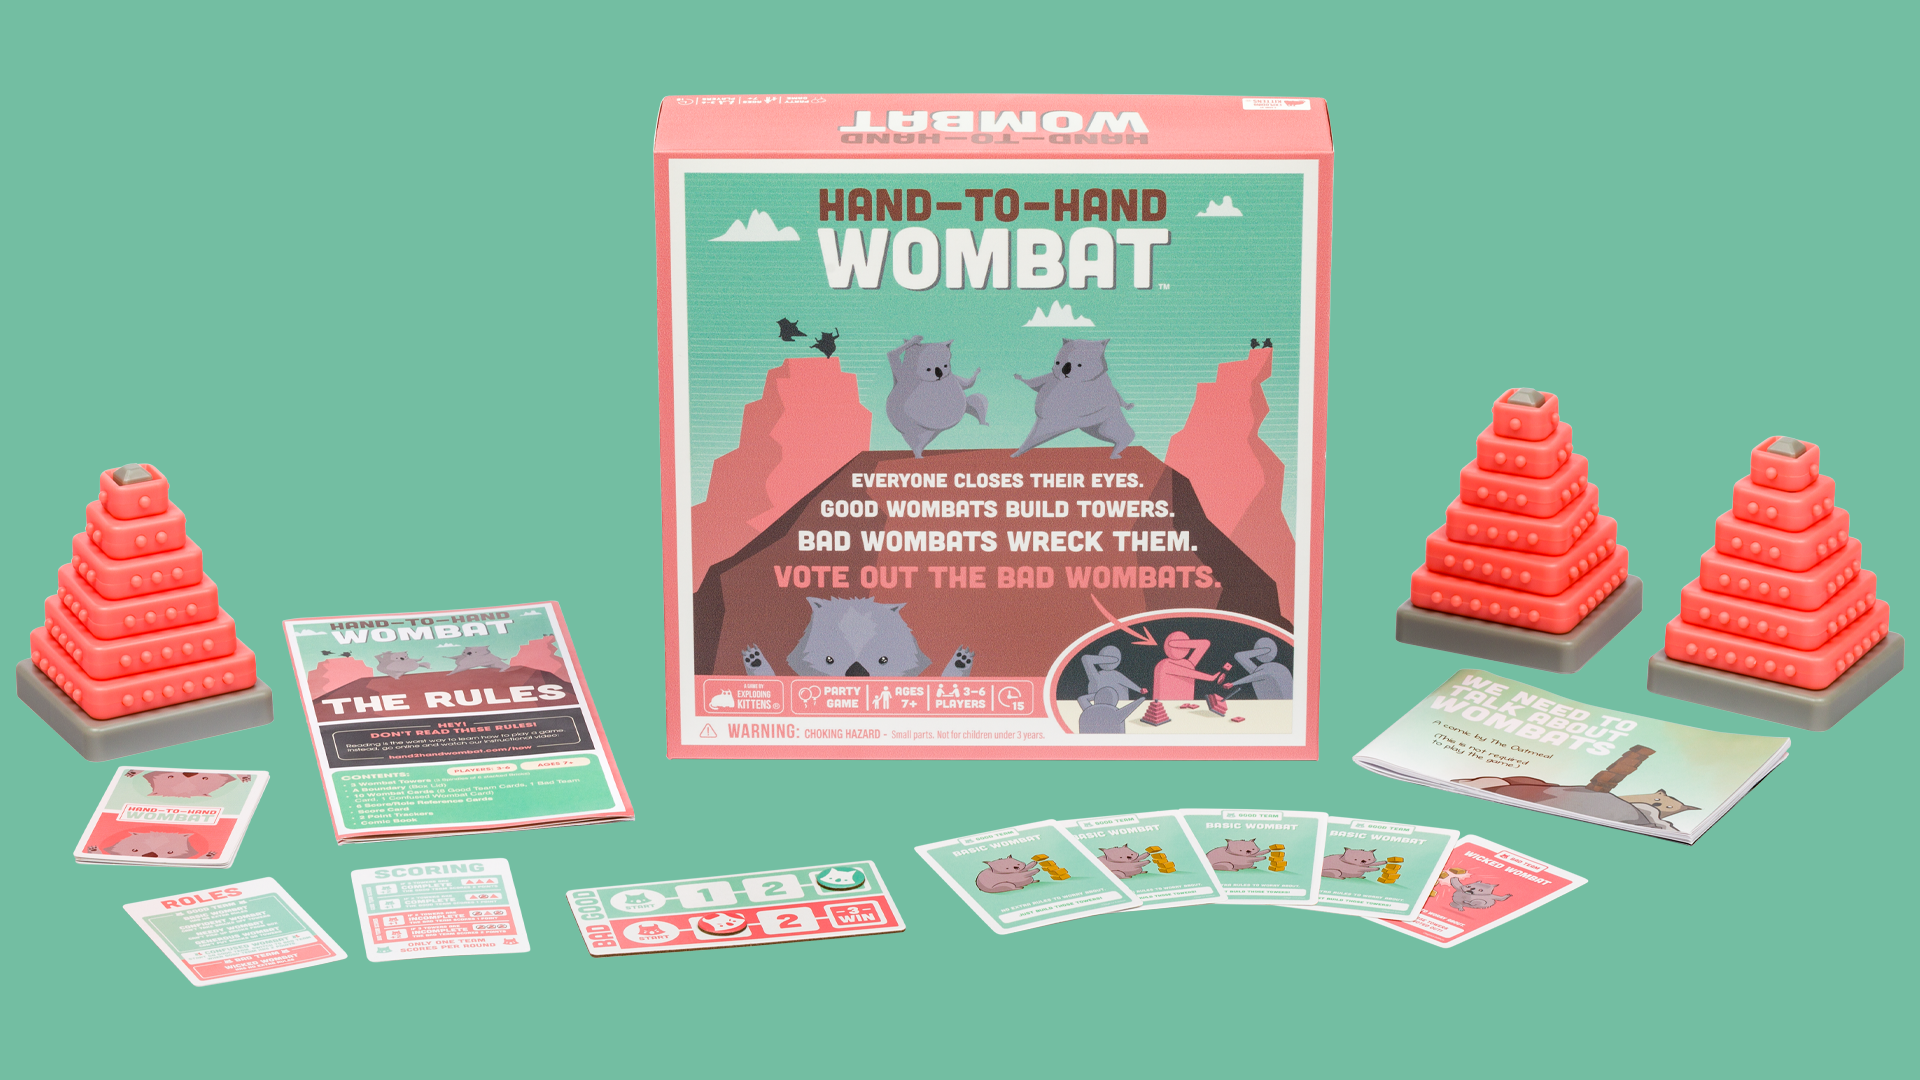 Image for Exploding Kittens creators return to Kickstarter with new party game Hand-to-Hand Wombat